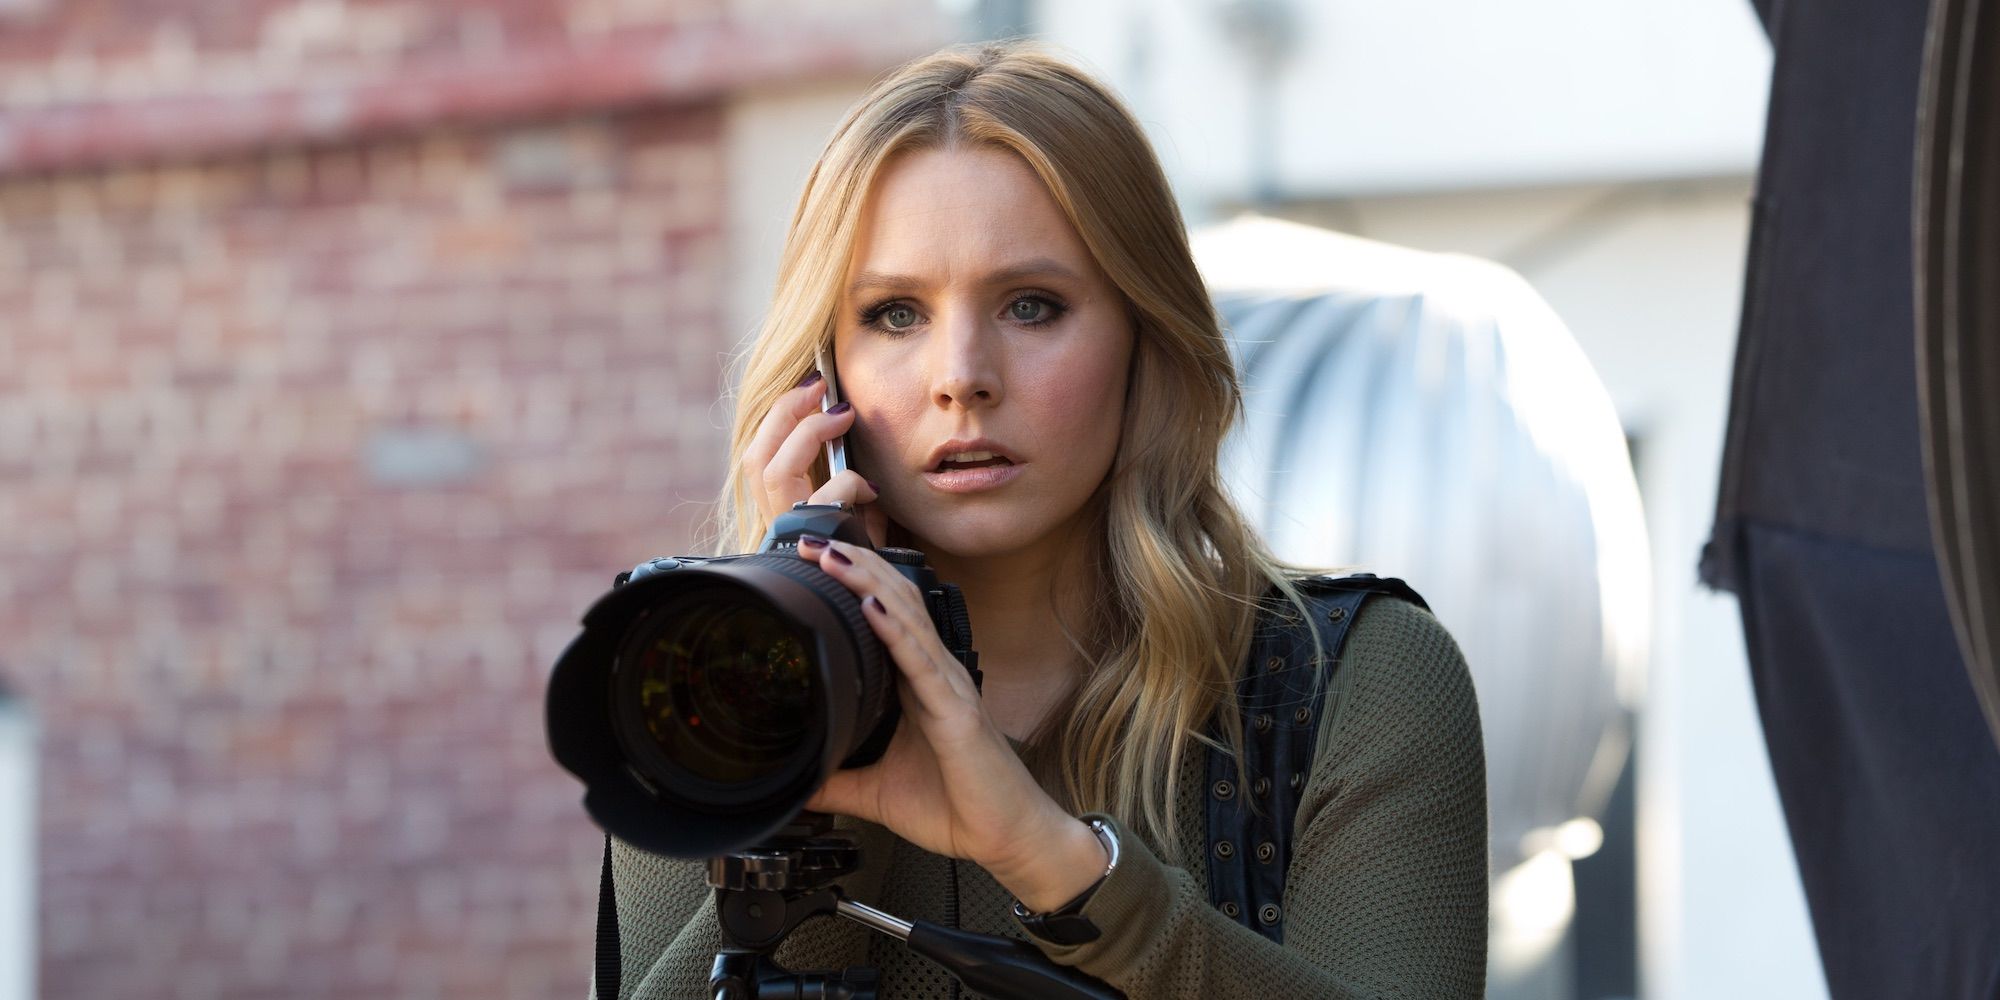 Kristen Bell as Veronica Mars holding a camera and talking on the phone in the 2014 movie